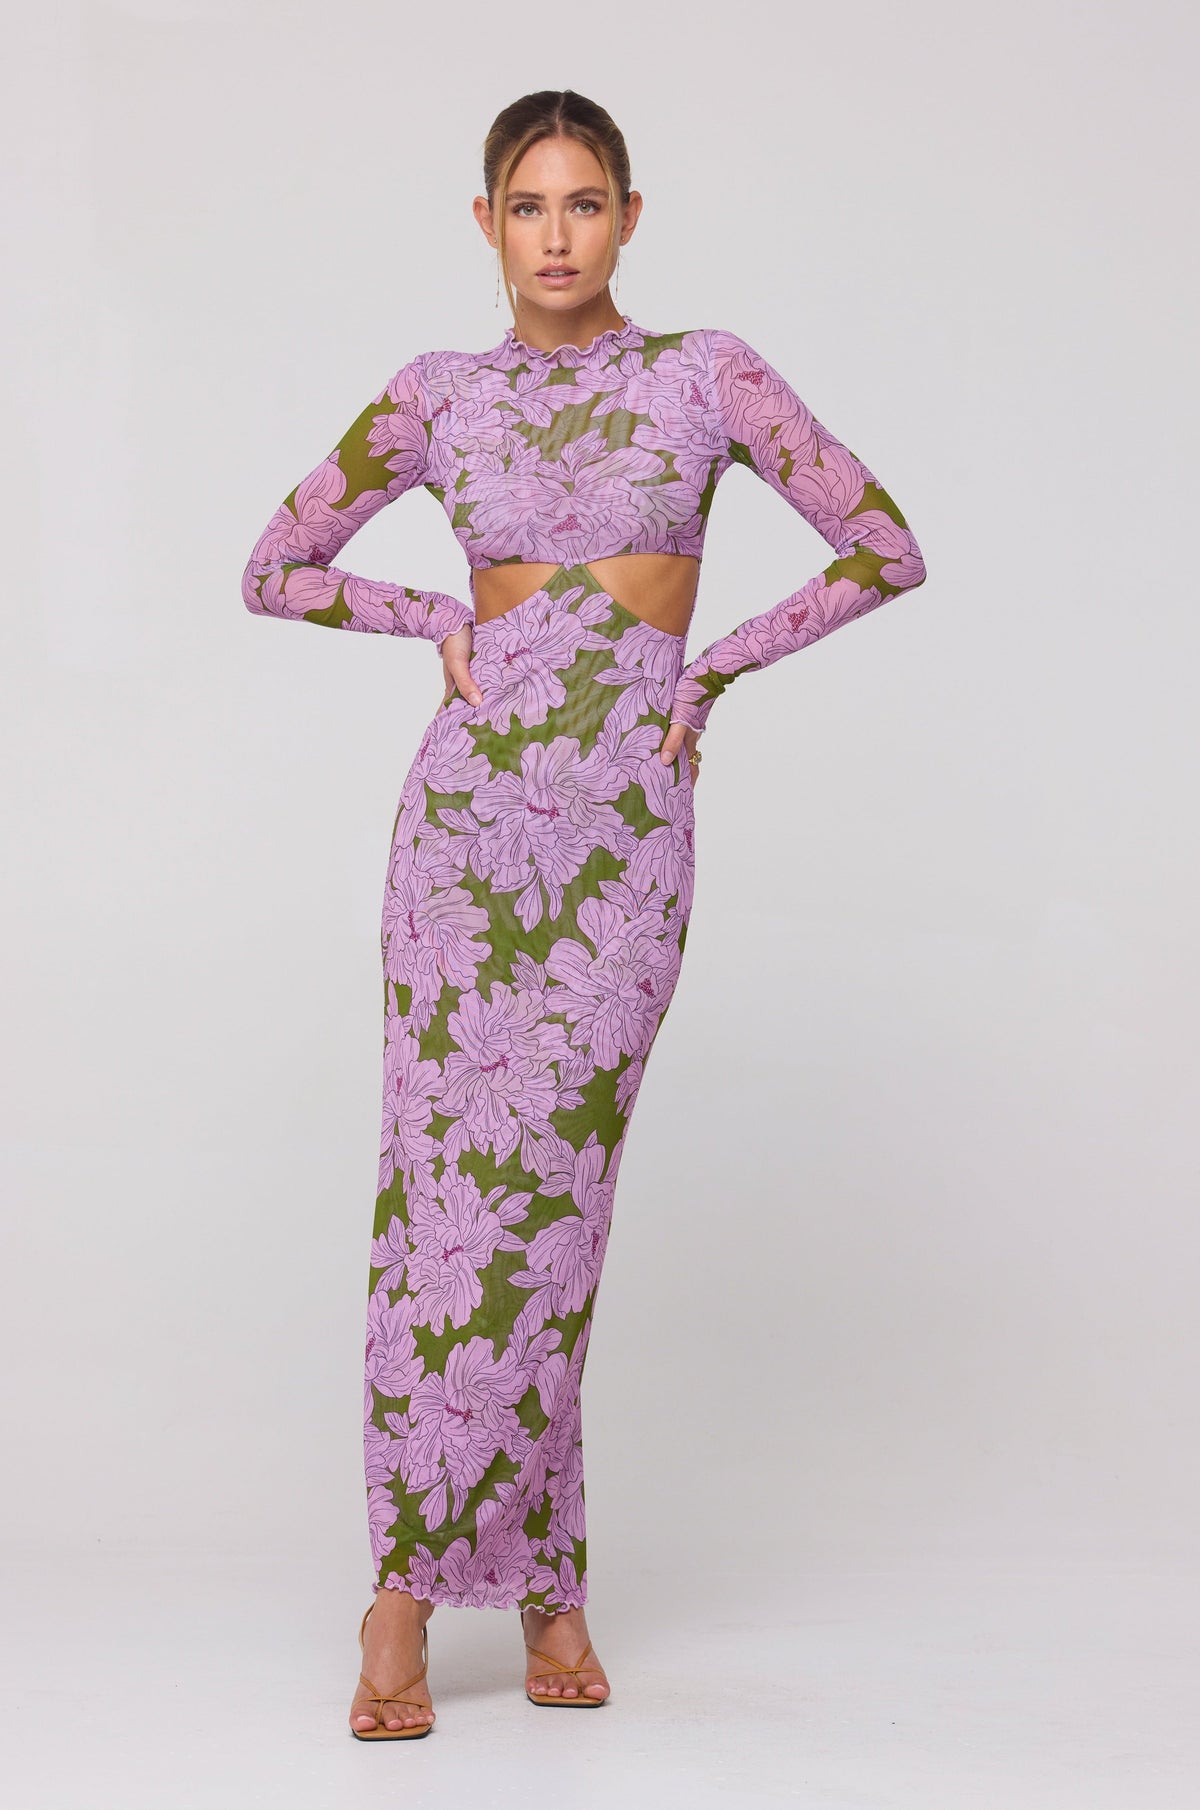 This is an image of Audrey Dress in Aster - RESA featuring a model wearing the dress